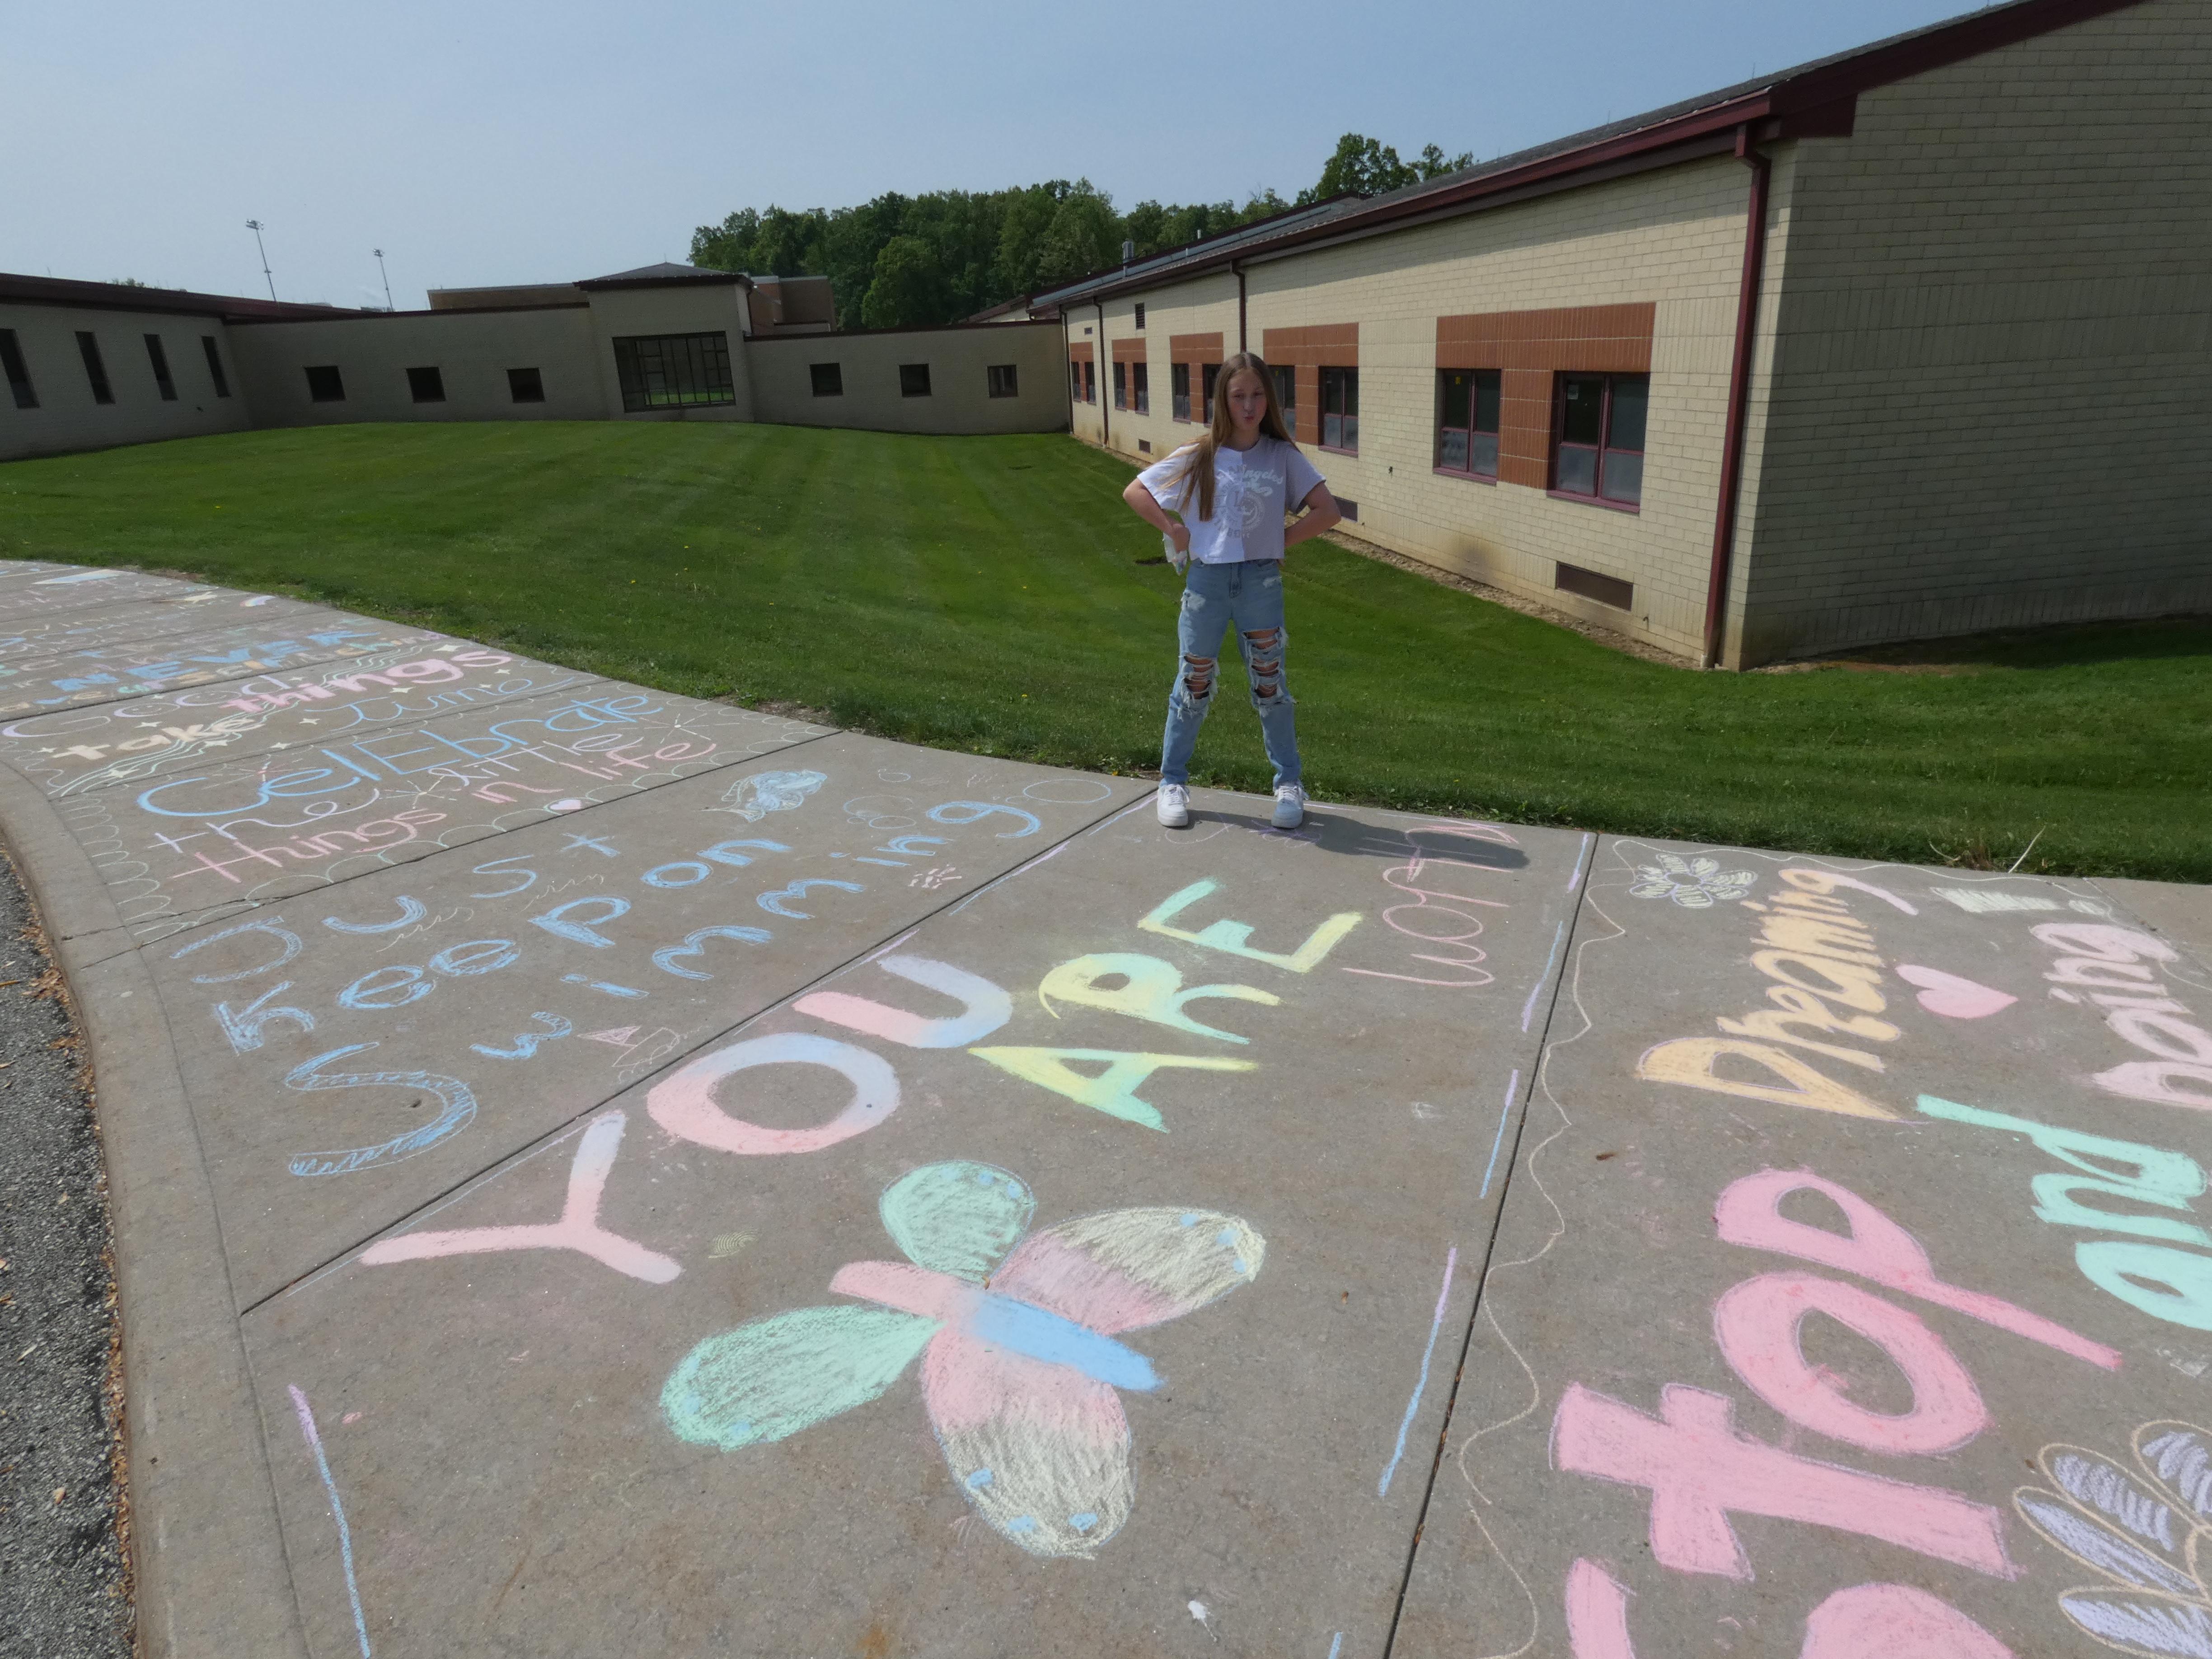 pic of student standing next to a message written in chalk